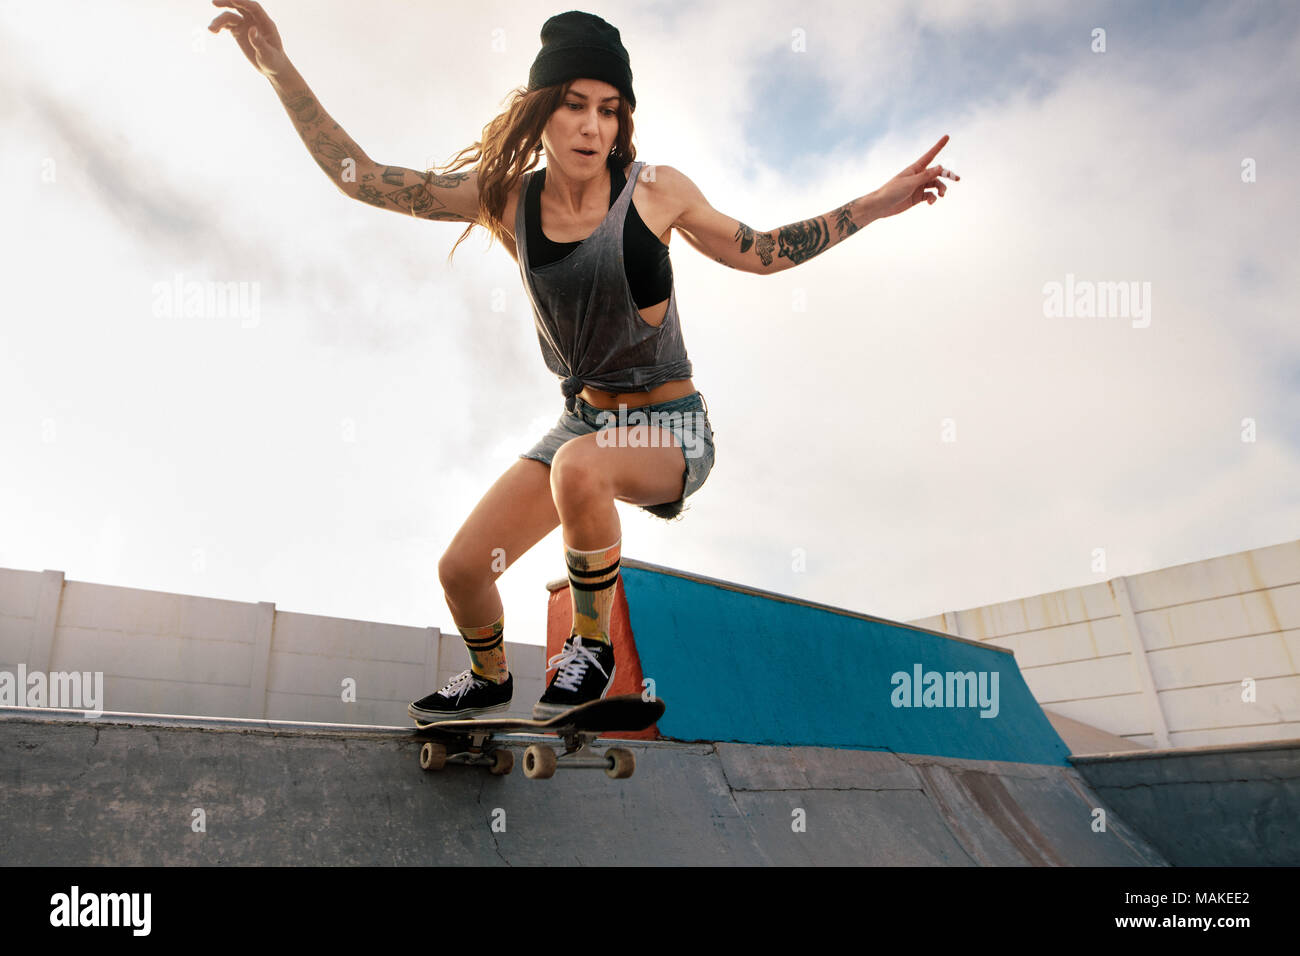 Cool young woman skateboarding at skate park. Female skater riding on  skateboard Stock Photo - Alamy